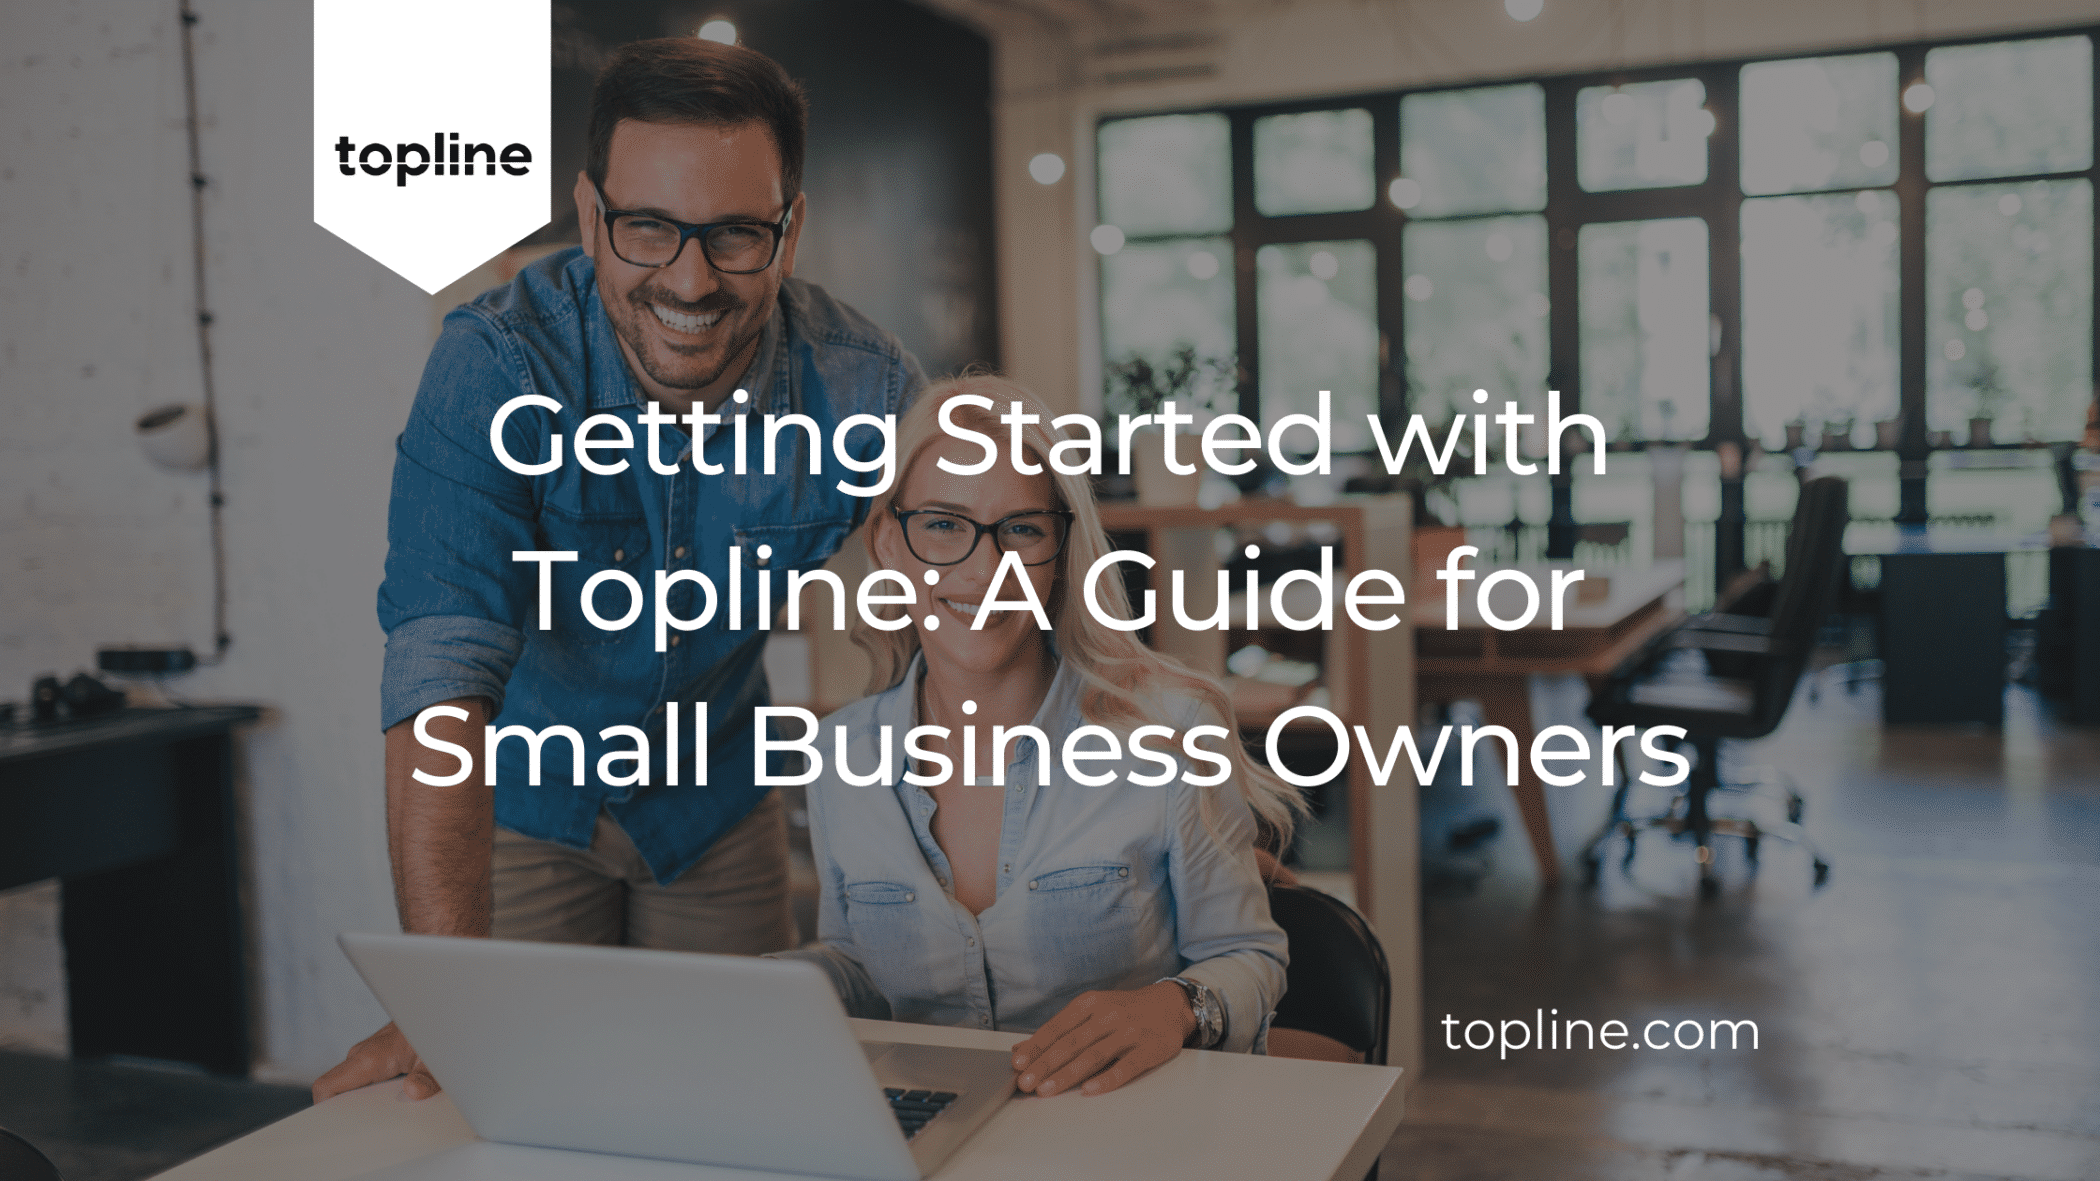 Getting Started with Topline: A Guide for Small Business Owners